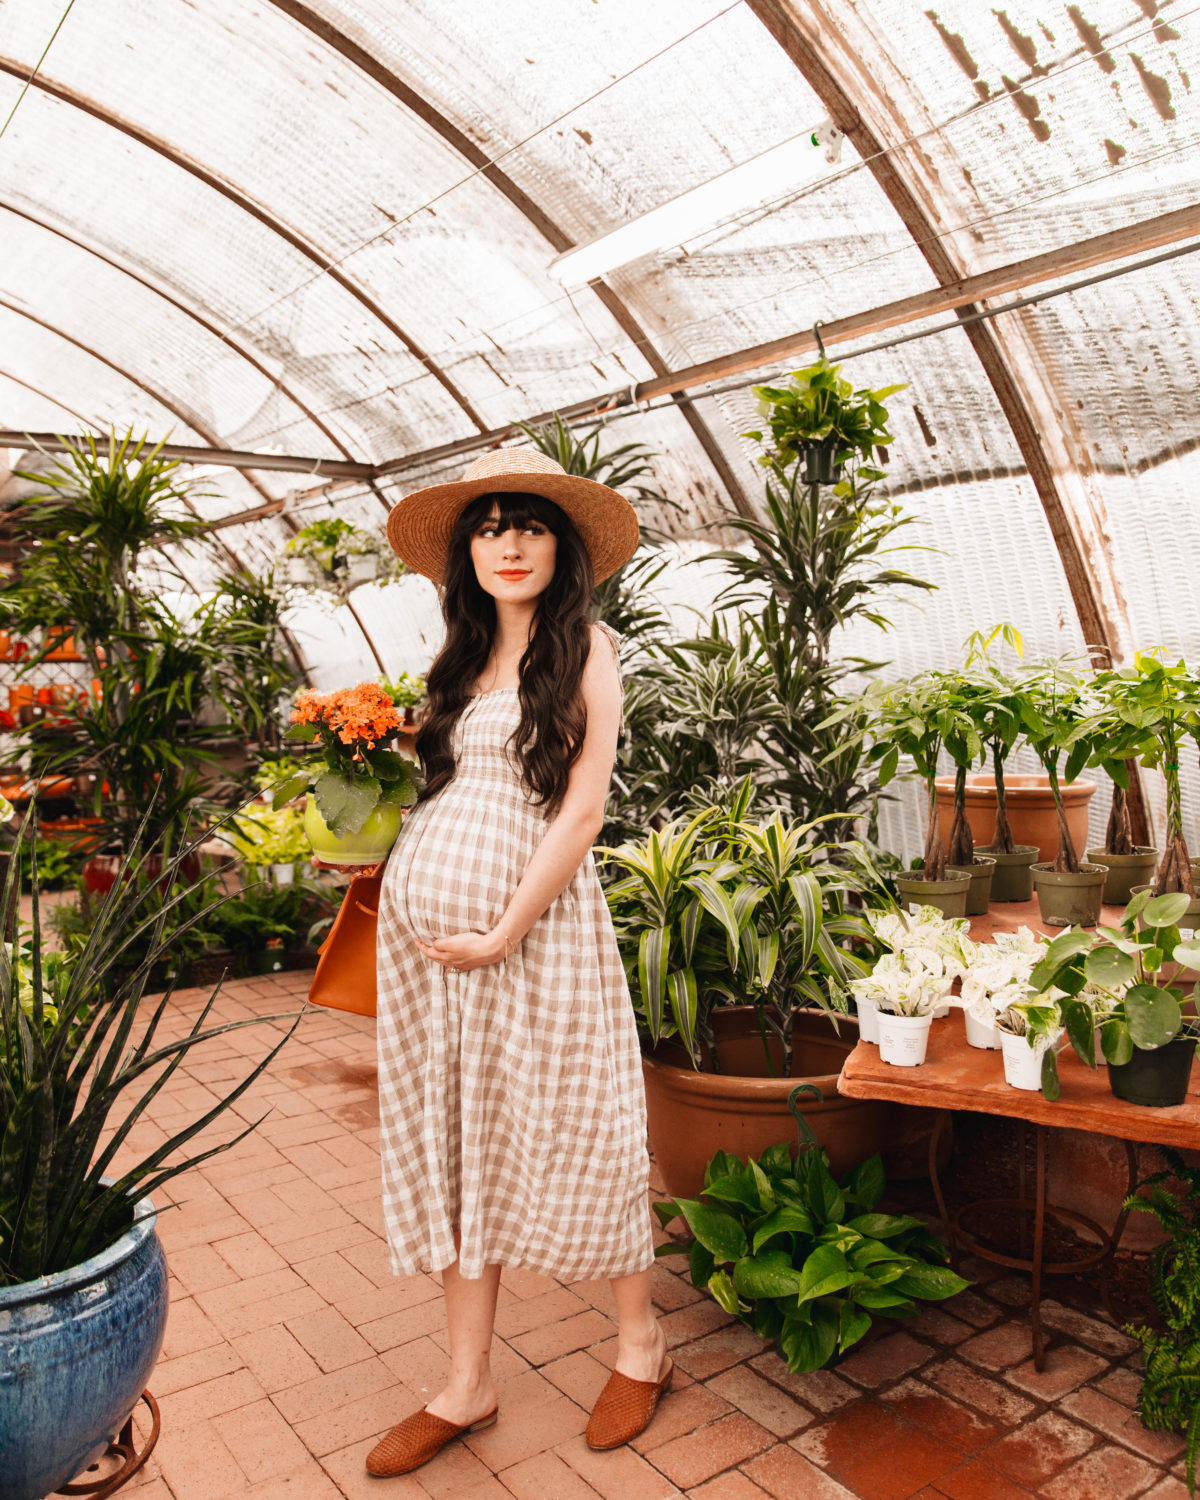 Maternity Style: What I Have Felt the Most Comfortable in While Pregnant